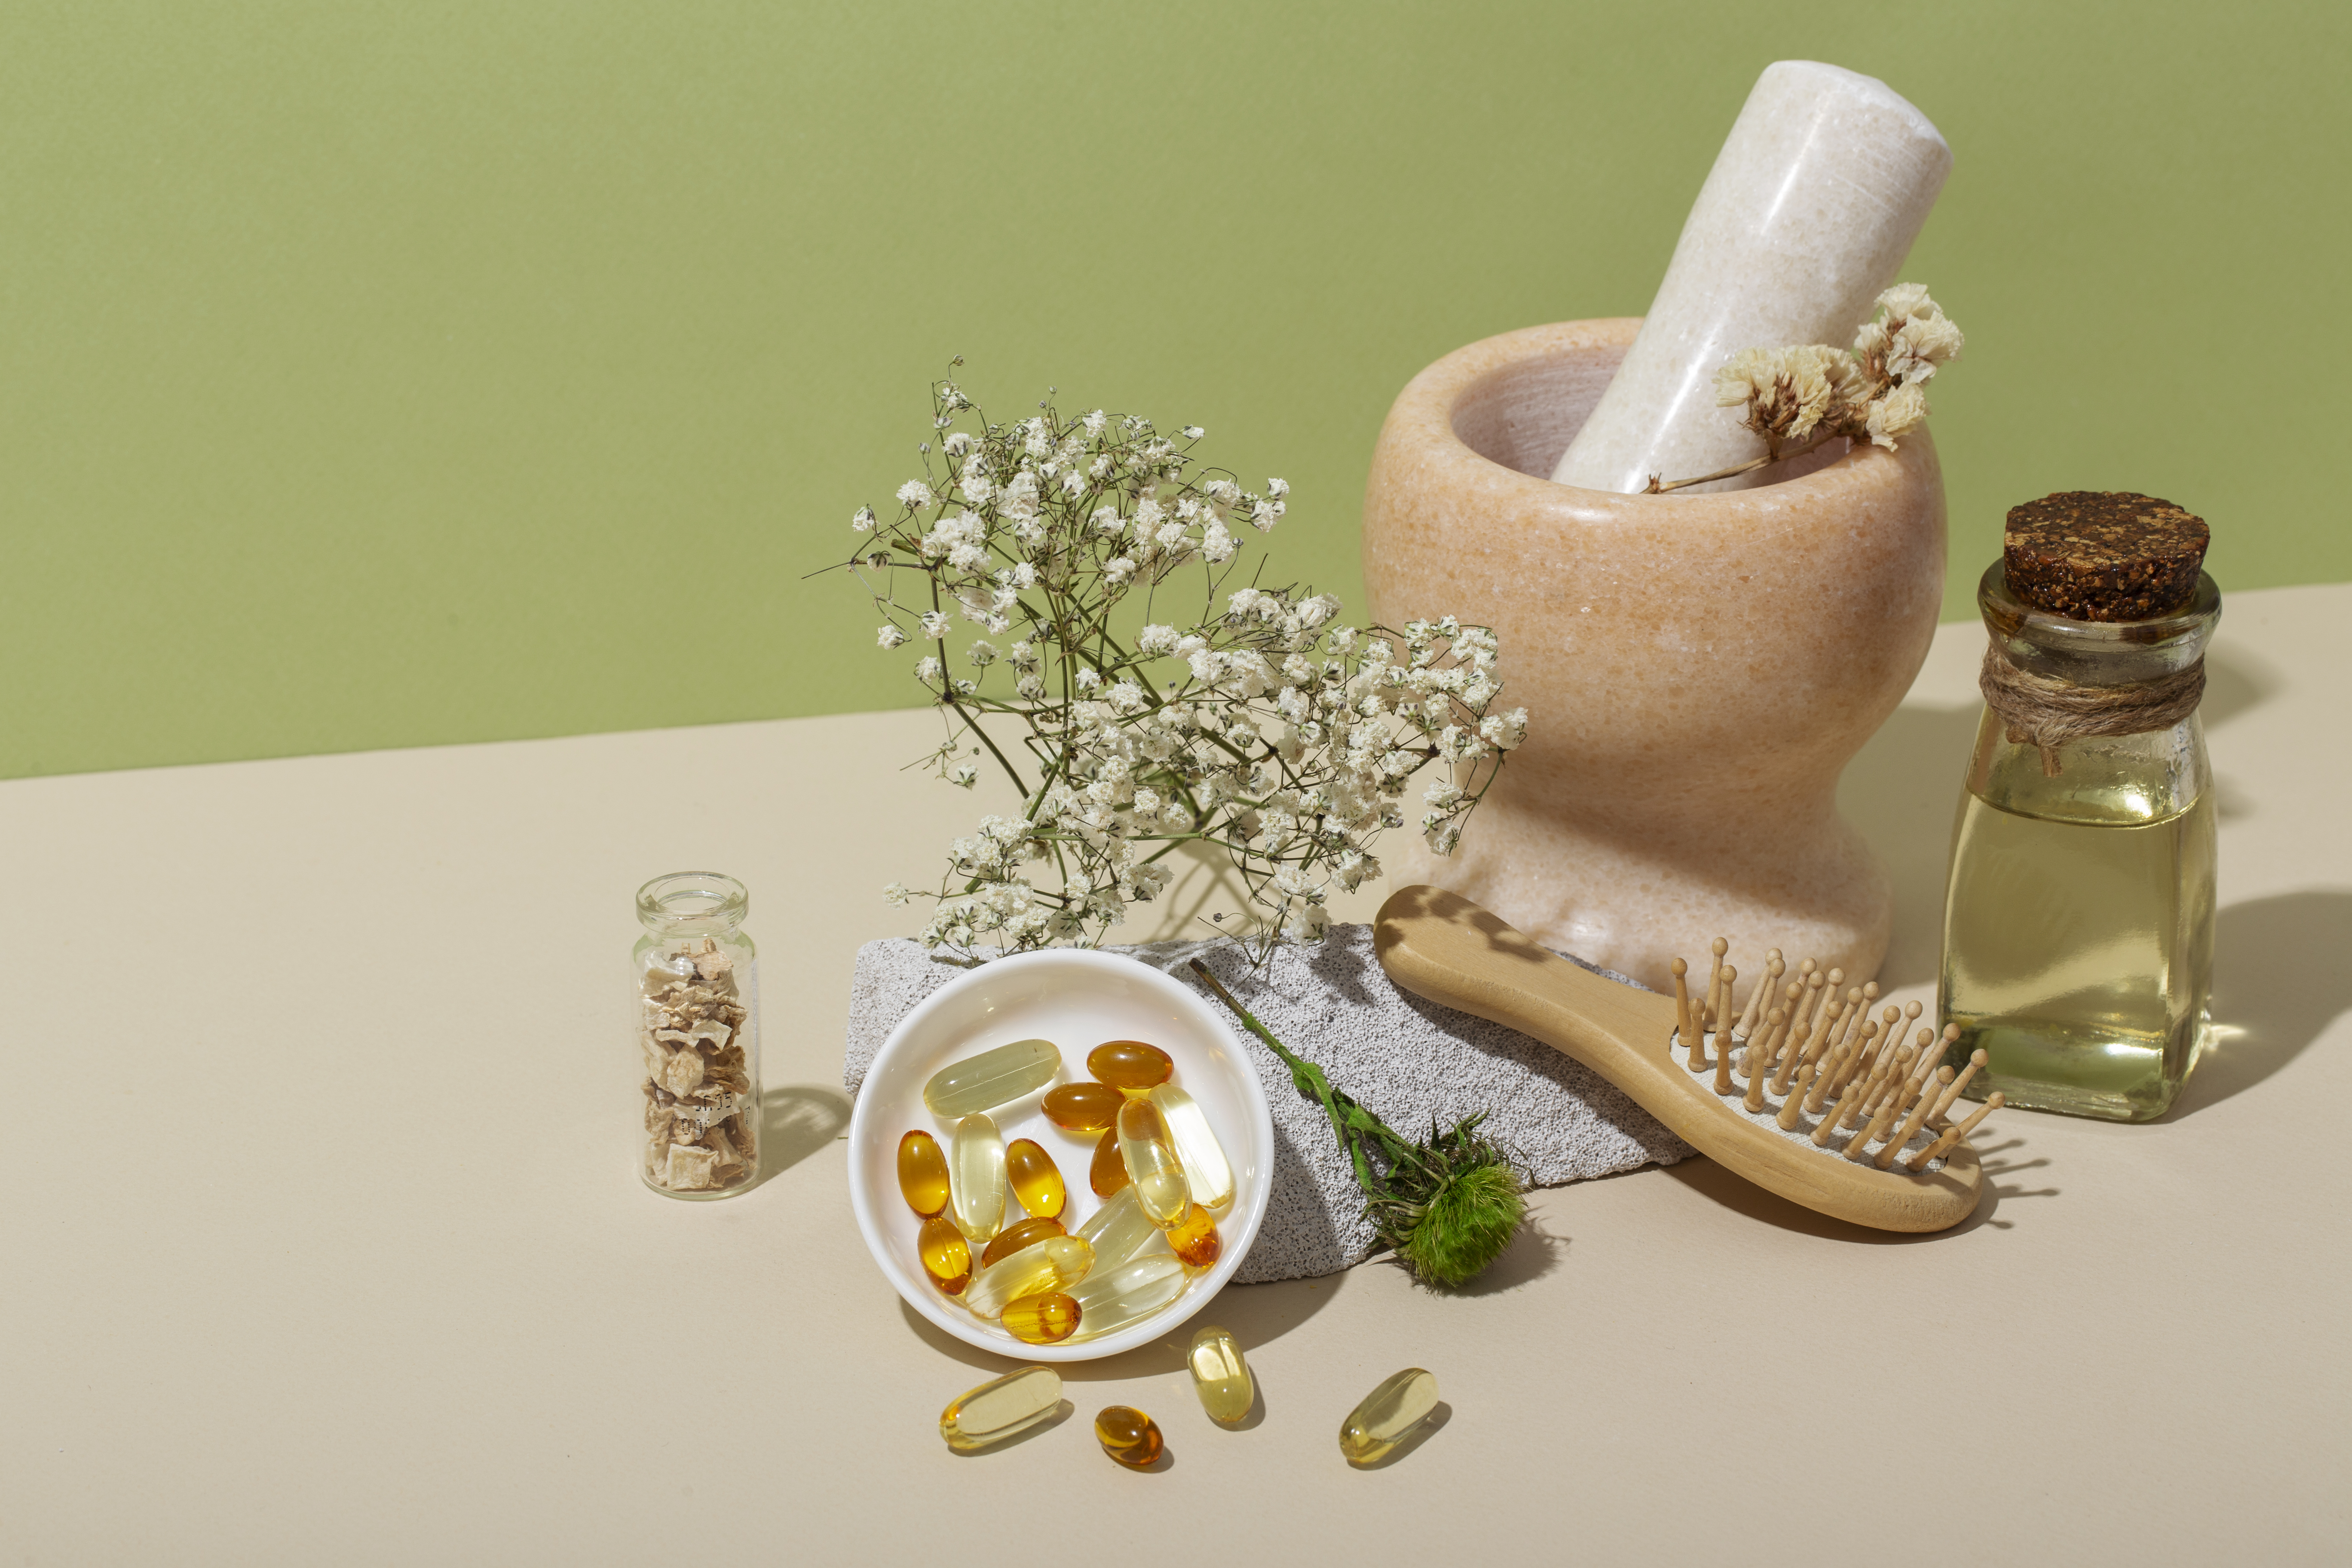 Bring Home the Advantages of Online Ayurvedic Medicine from Chikitsaratna.in – Chikitsaratna